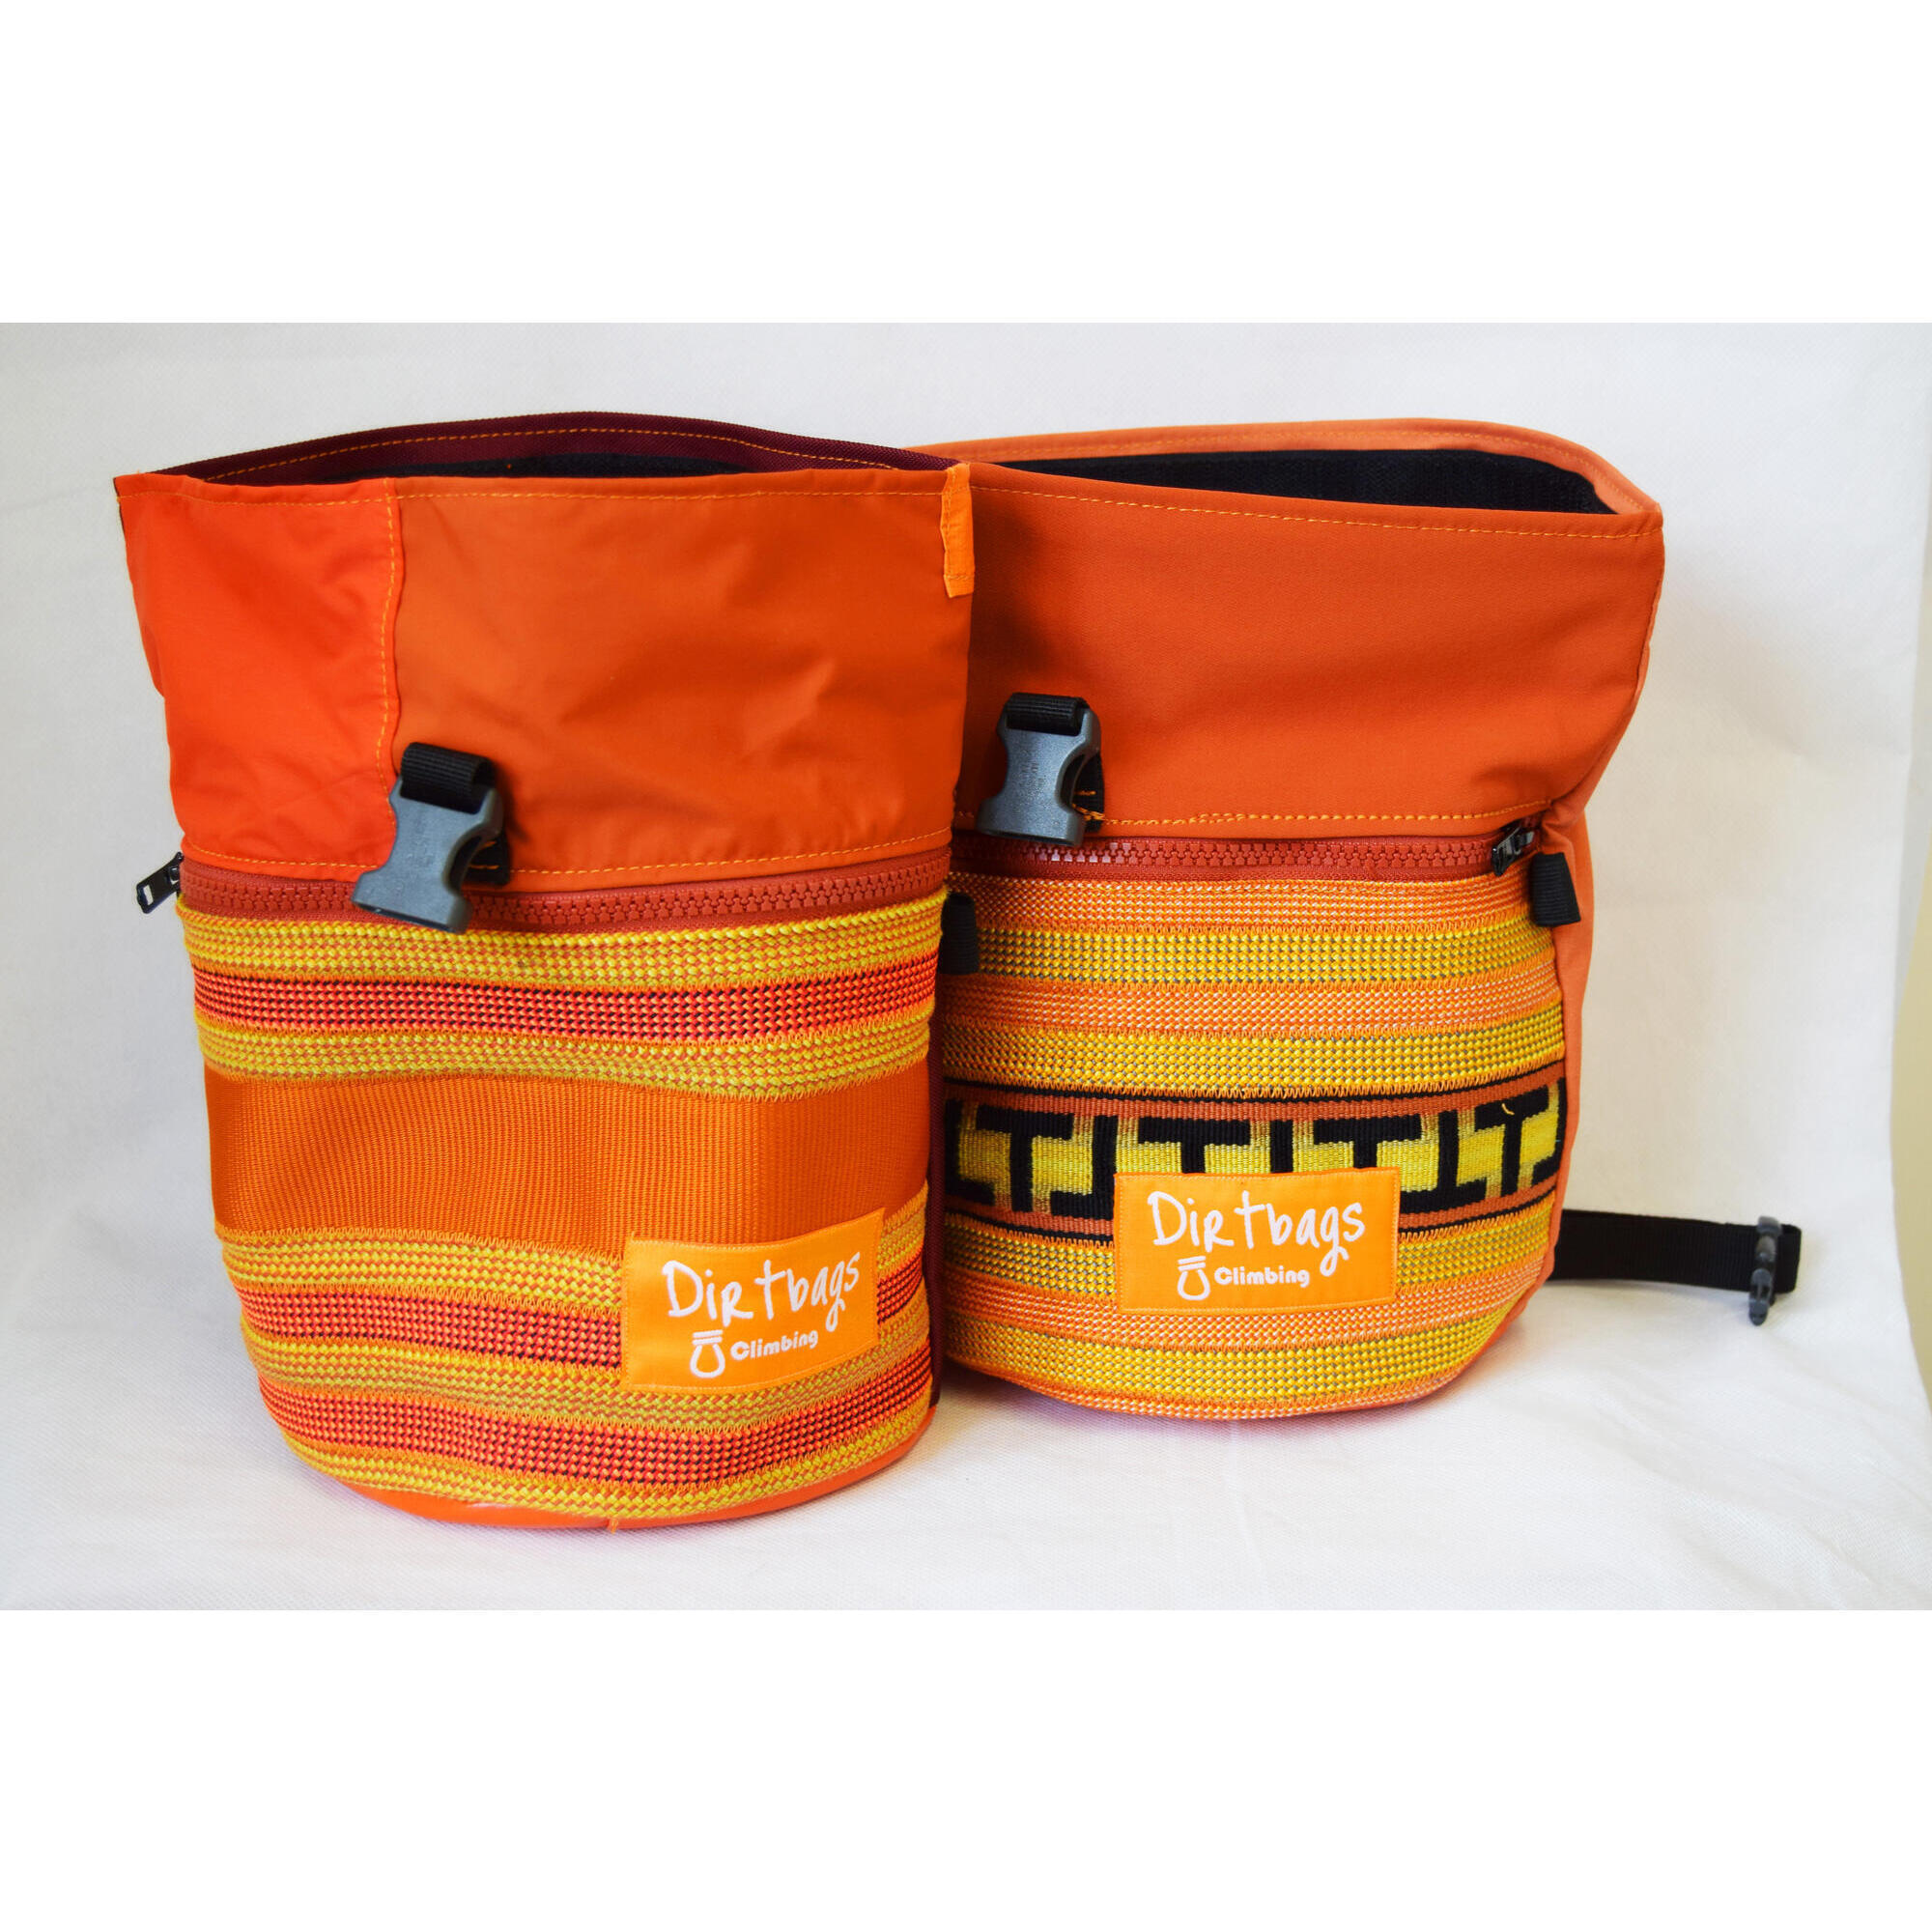 DIRTBAGS CLIMBING Boulder bag made with recycled climbing rope and upcycled fabric. Orange / Red